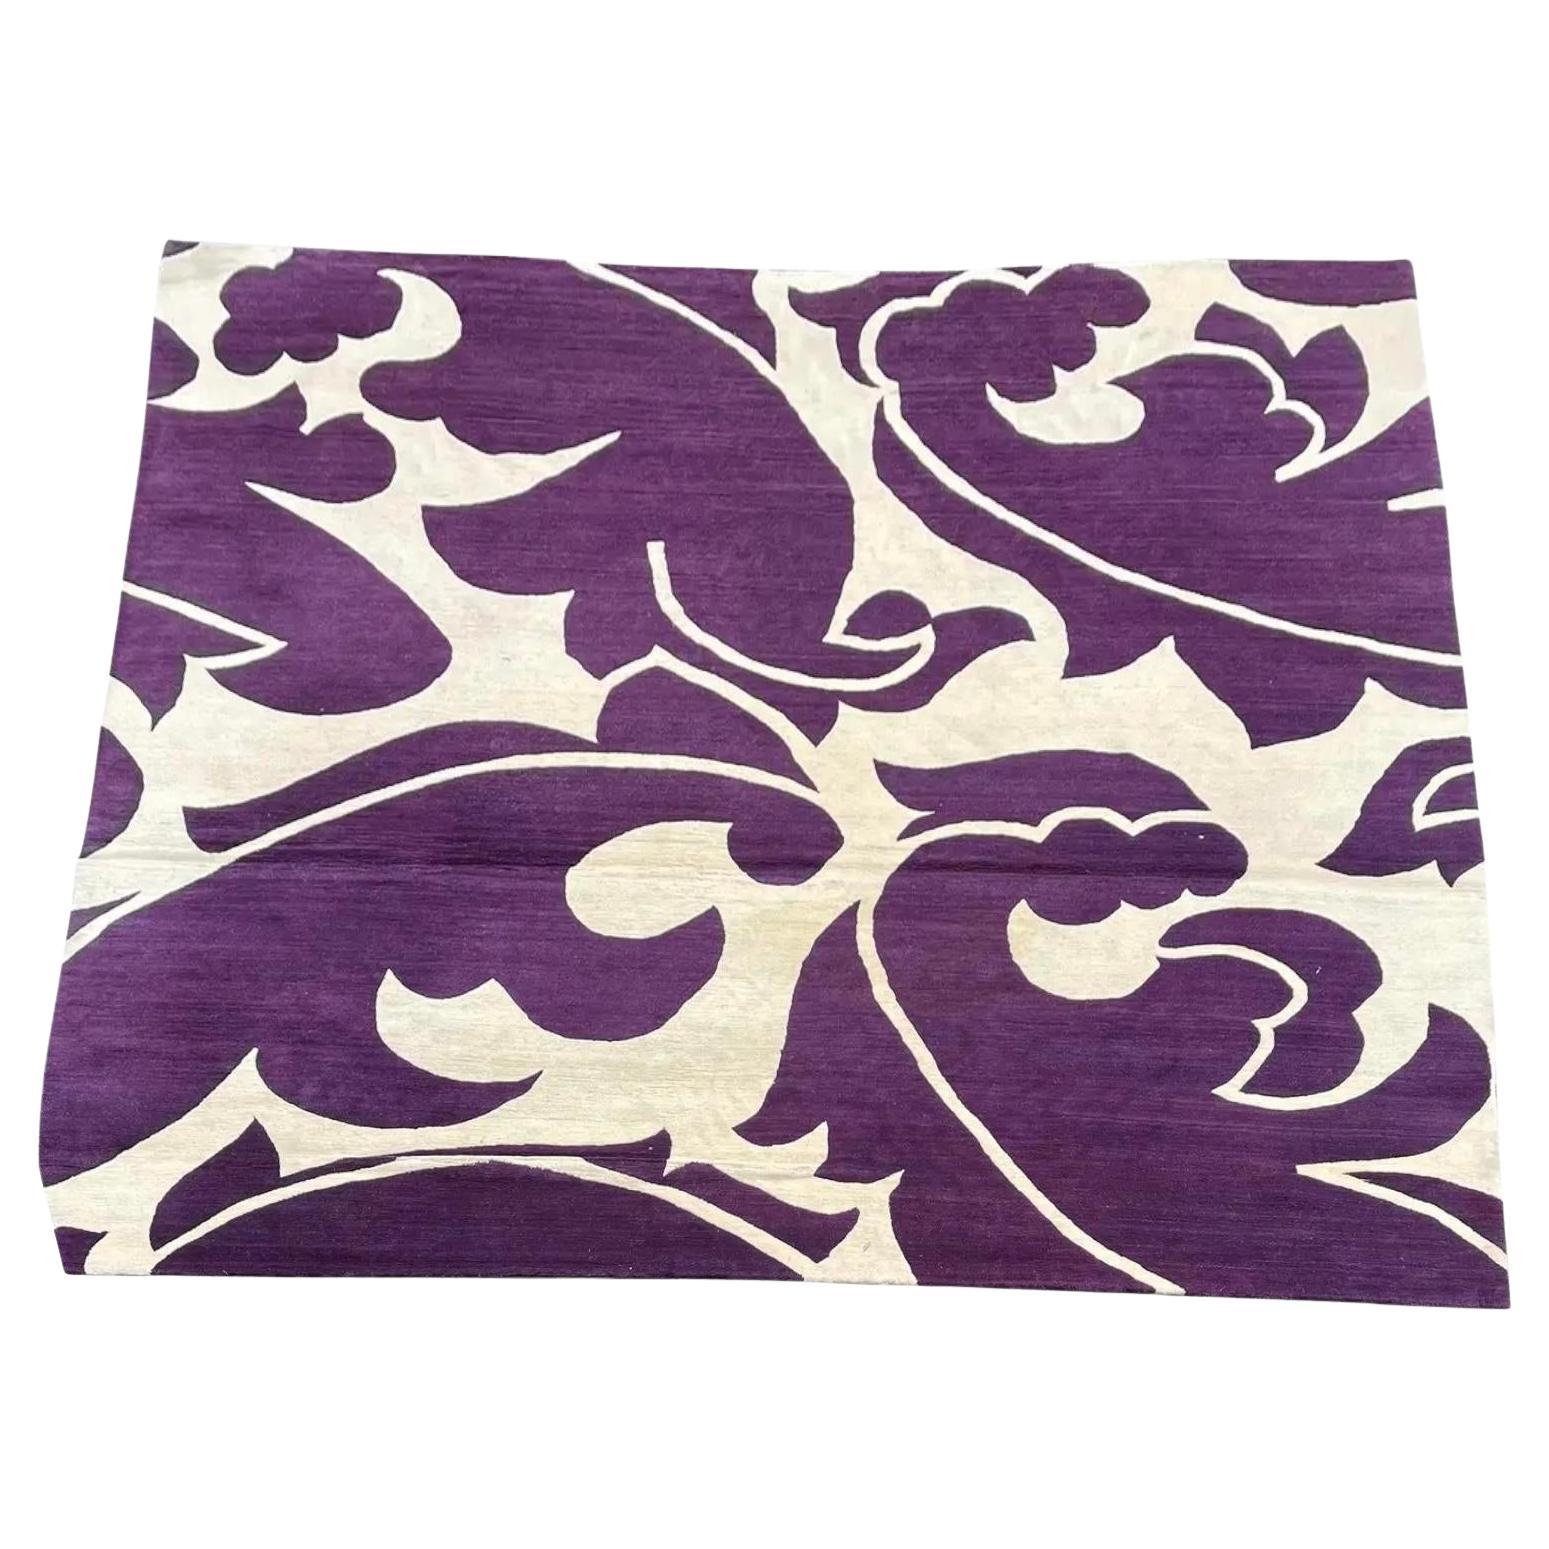 10' by 10' Modern Purple & White Carpet by Marni for the Rug Company